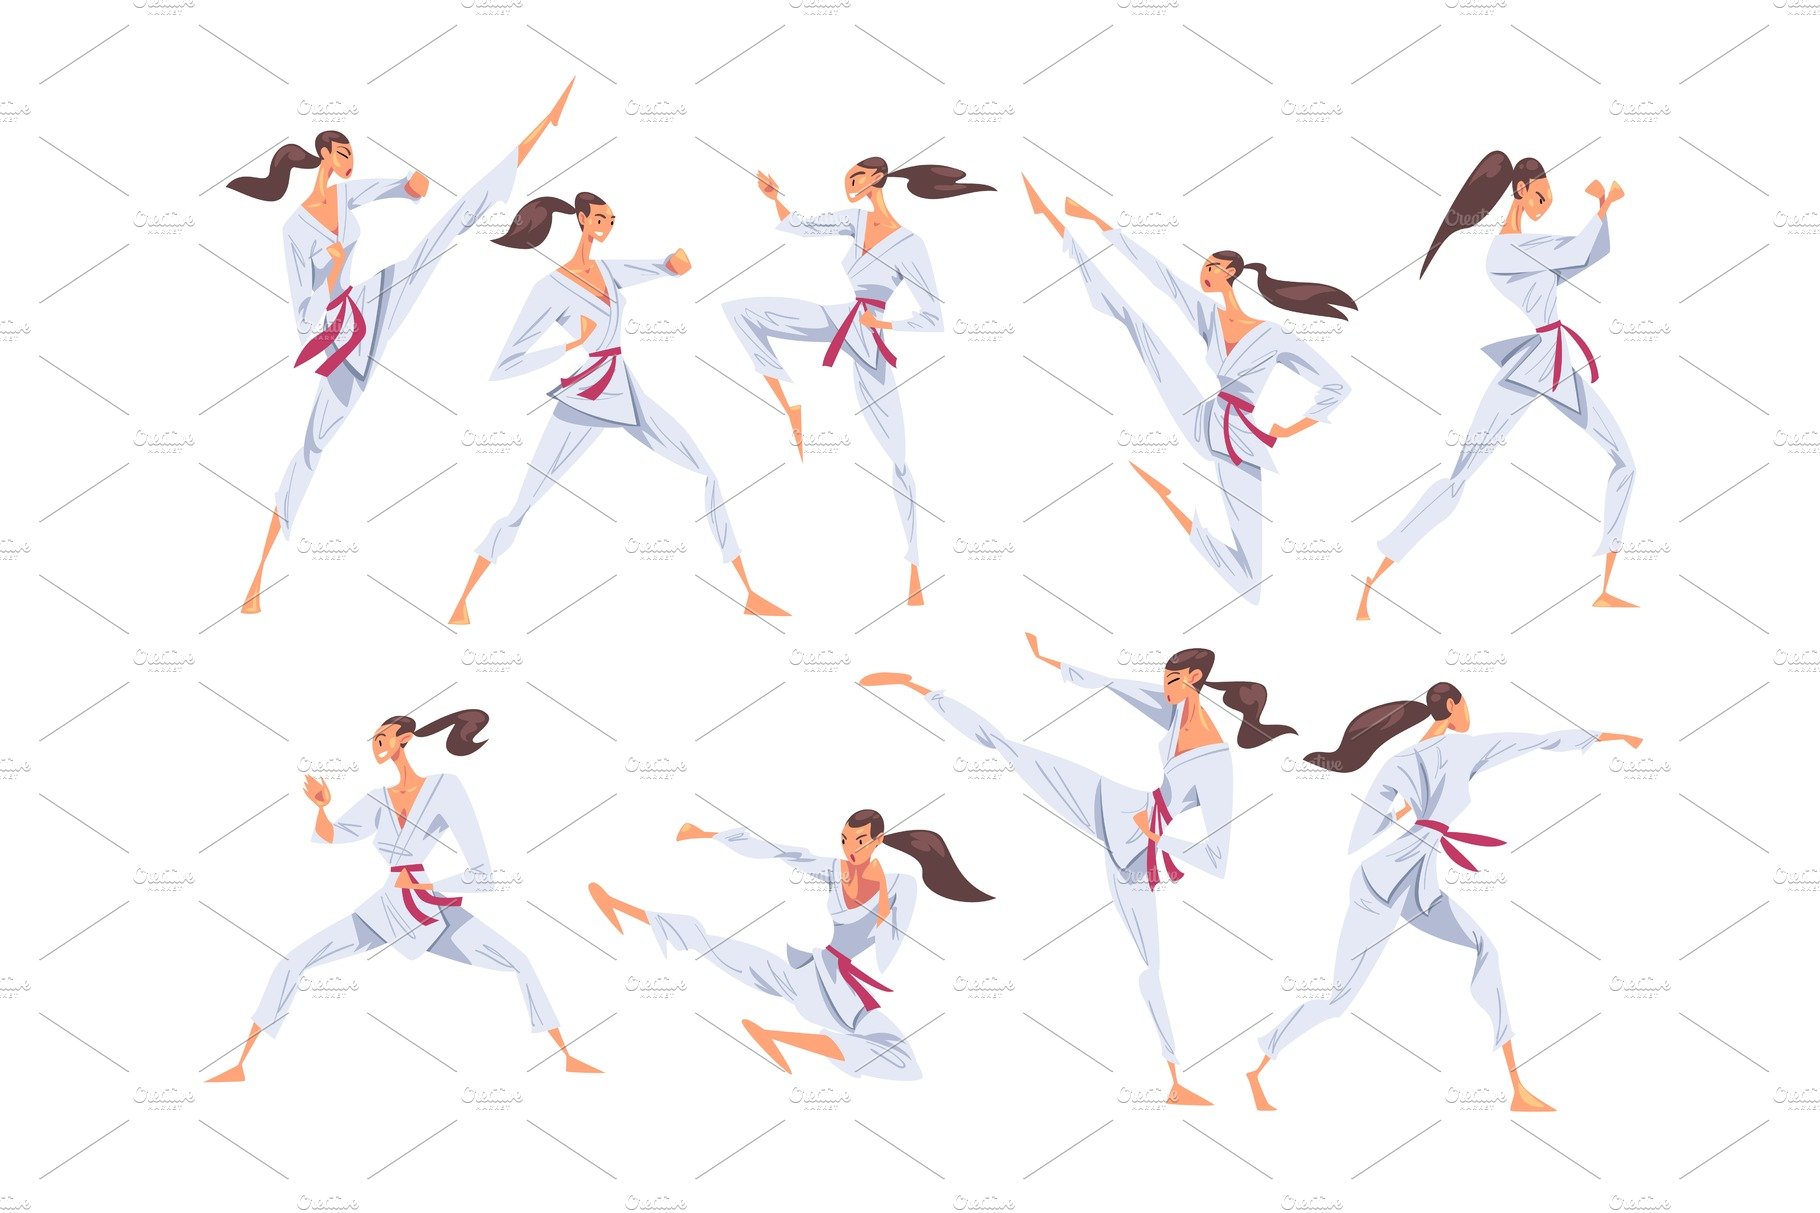 Girl Doing Karate in Various Poses cover image.